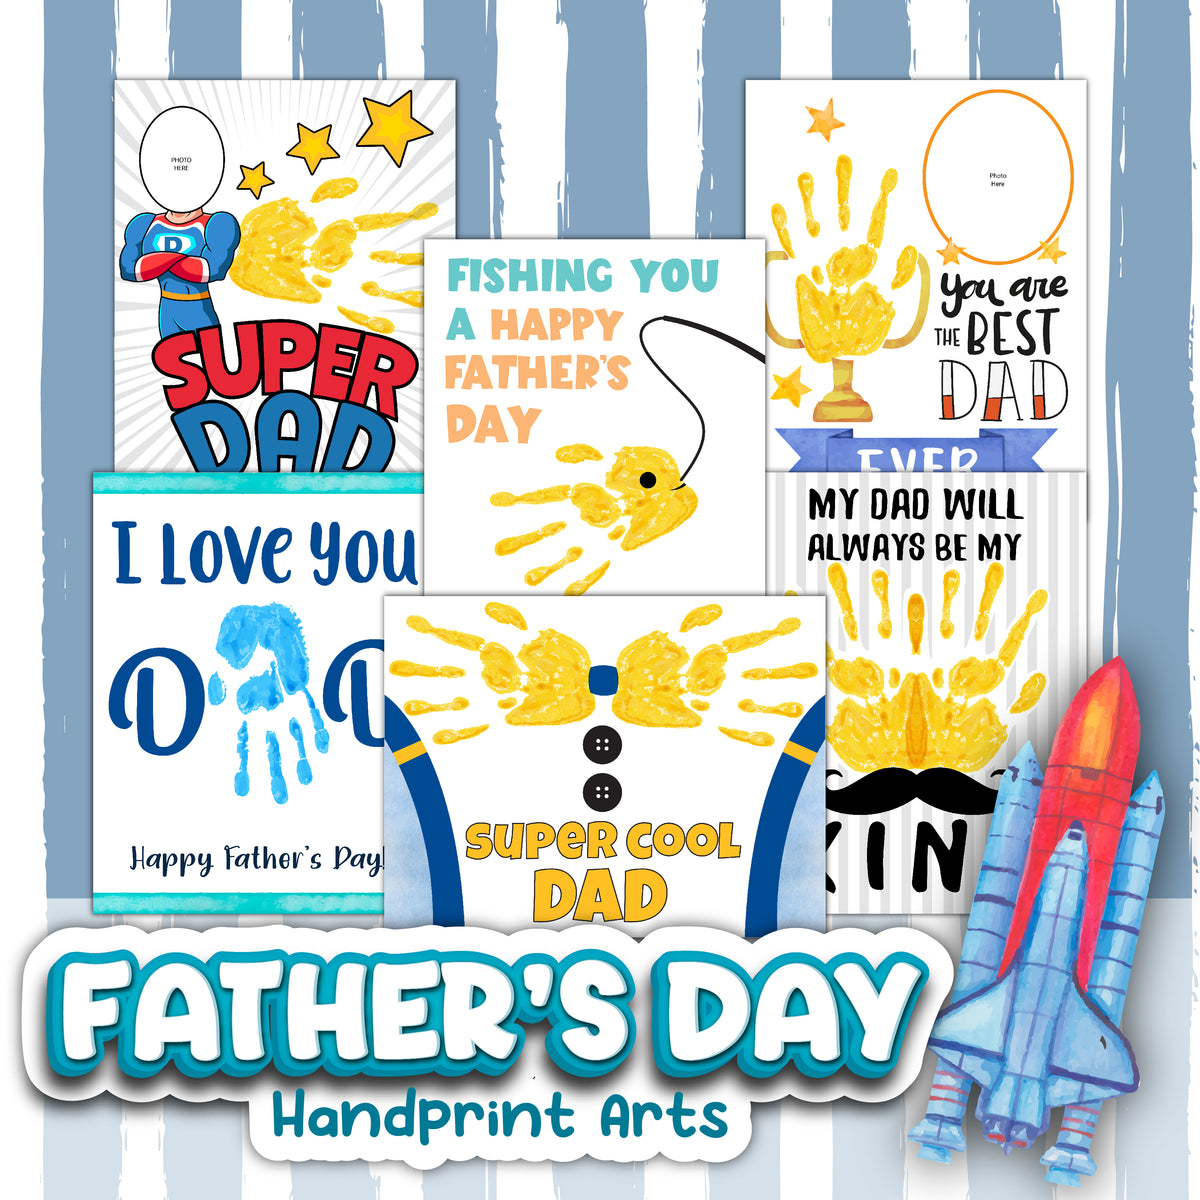 Happy Father's Day Handprint Fish Craft and Free Template - A